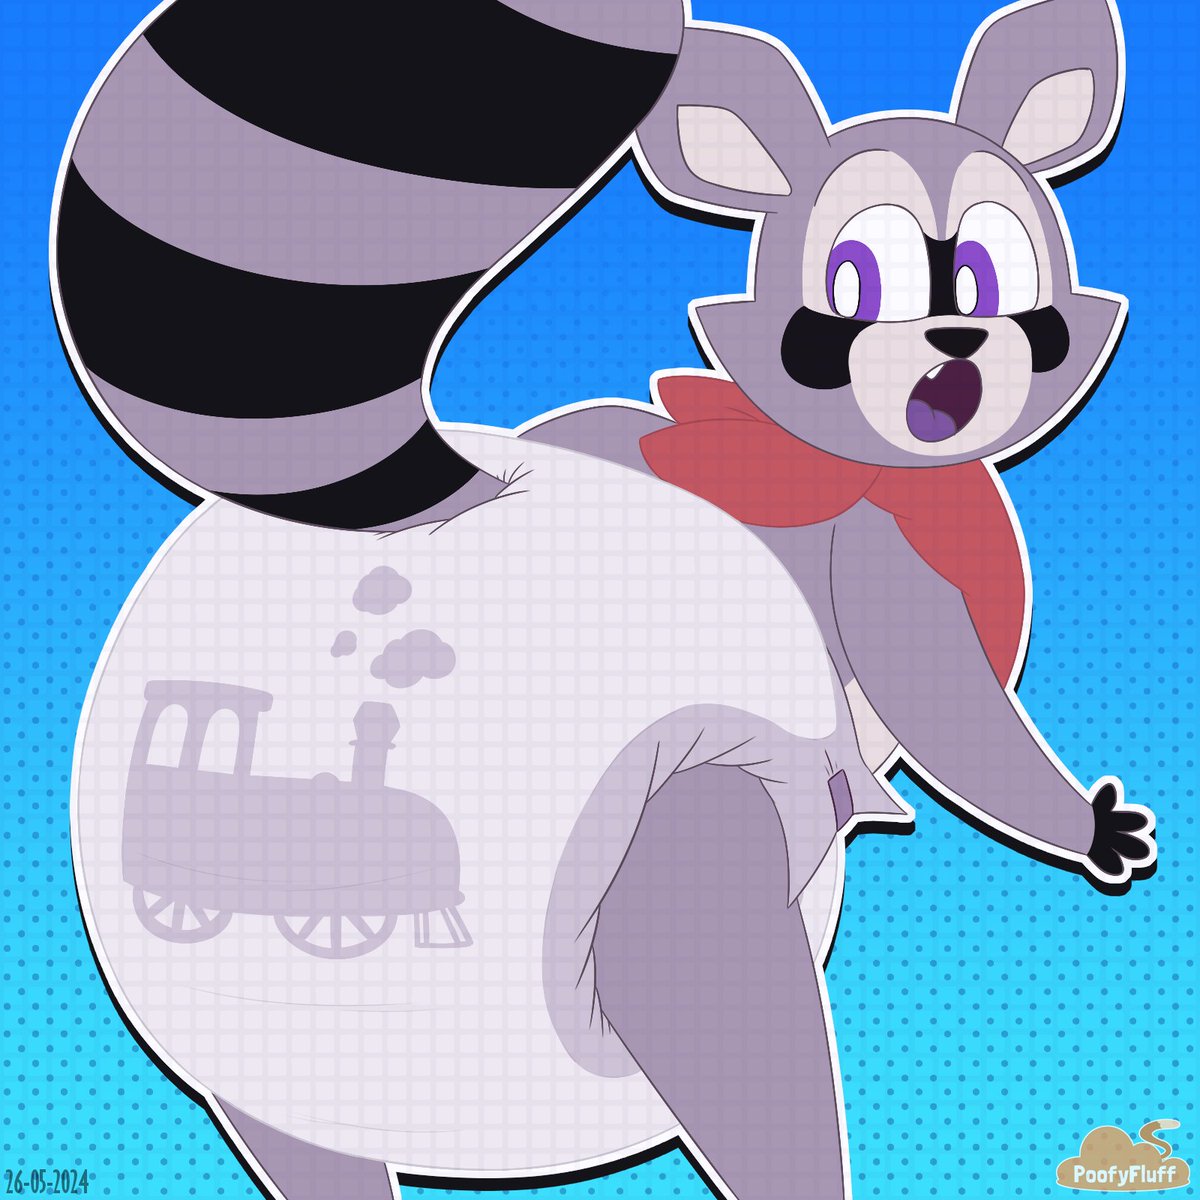 Even little train conductors need to be safe and padded~!